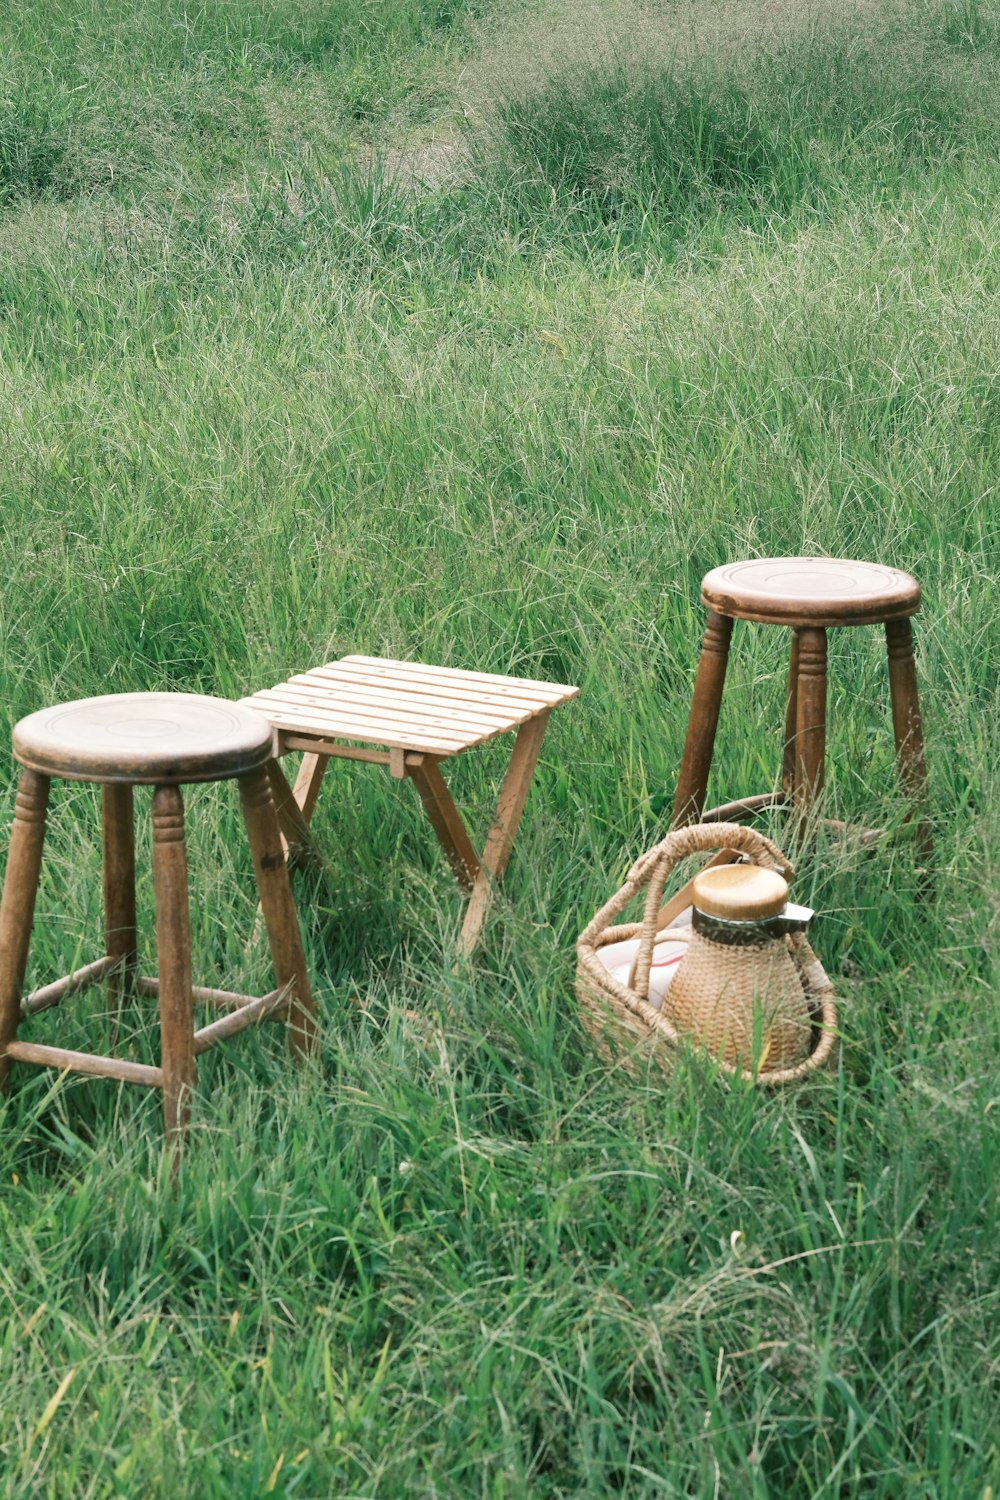 two stools and a table in a grassy field